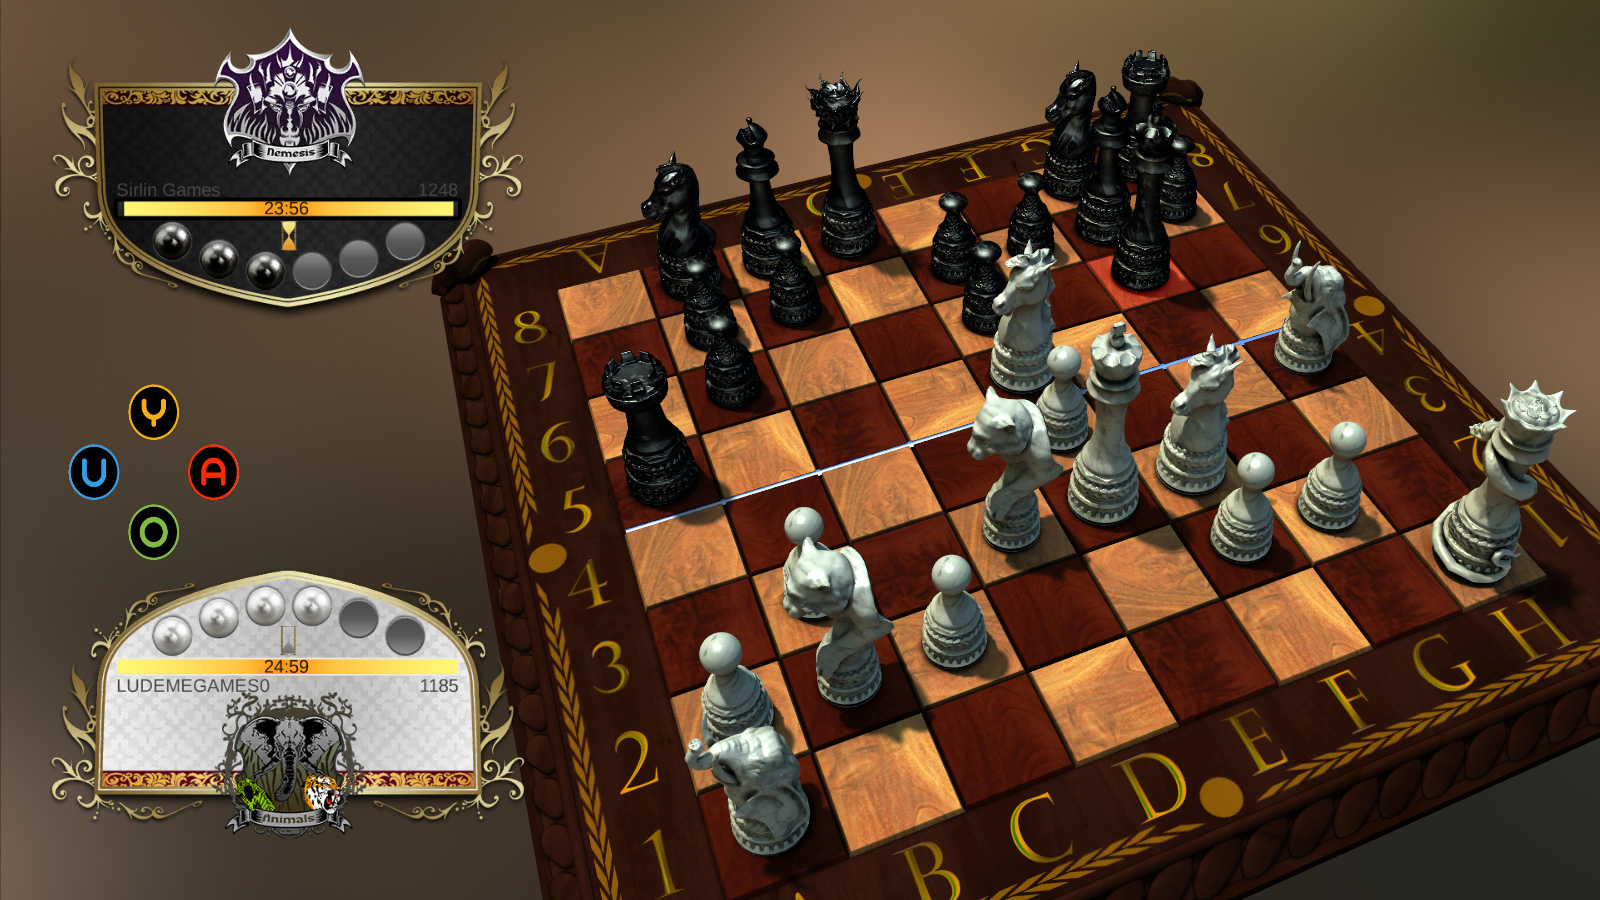 Second Life Marketplace - Chess - Fully Playable Mesh Chess Computer Game  (LI=6)